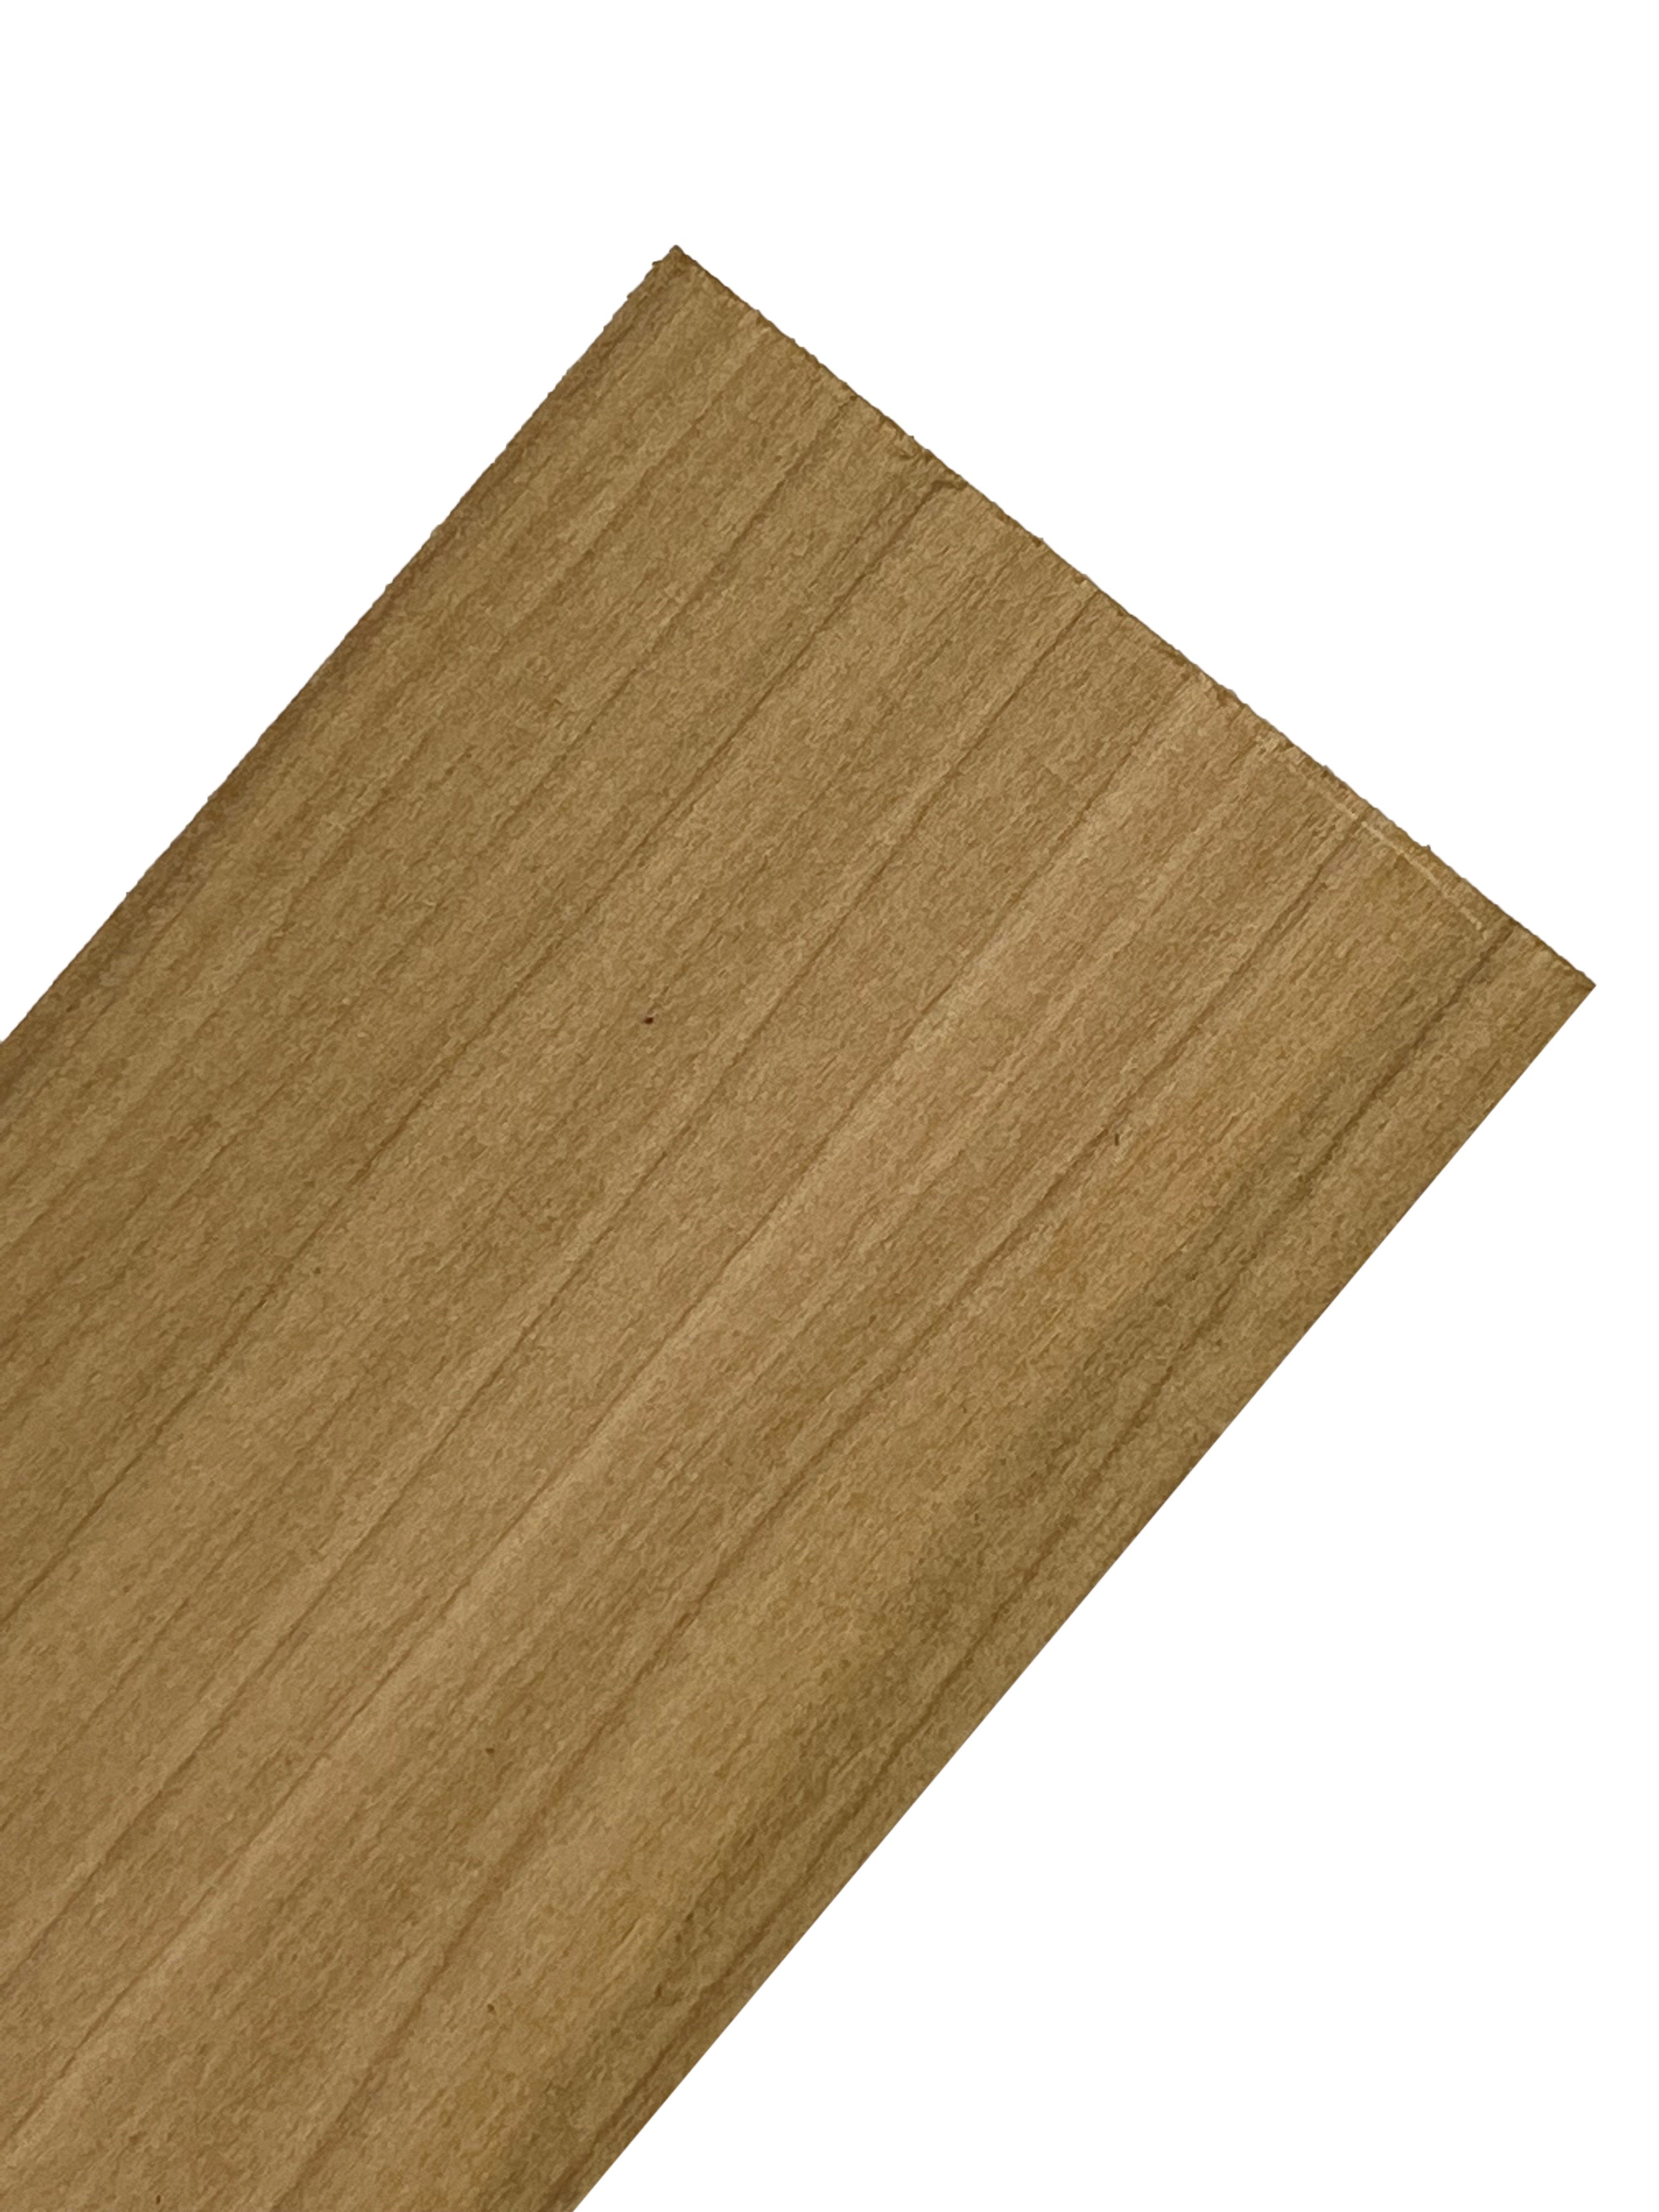 Yellow Poplar Thin Stock Lumber Boards Wood Crafts - Exotic Wood Zone - Buy online Across USA 